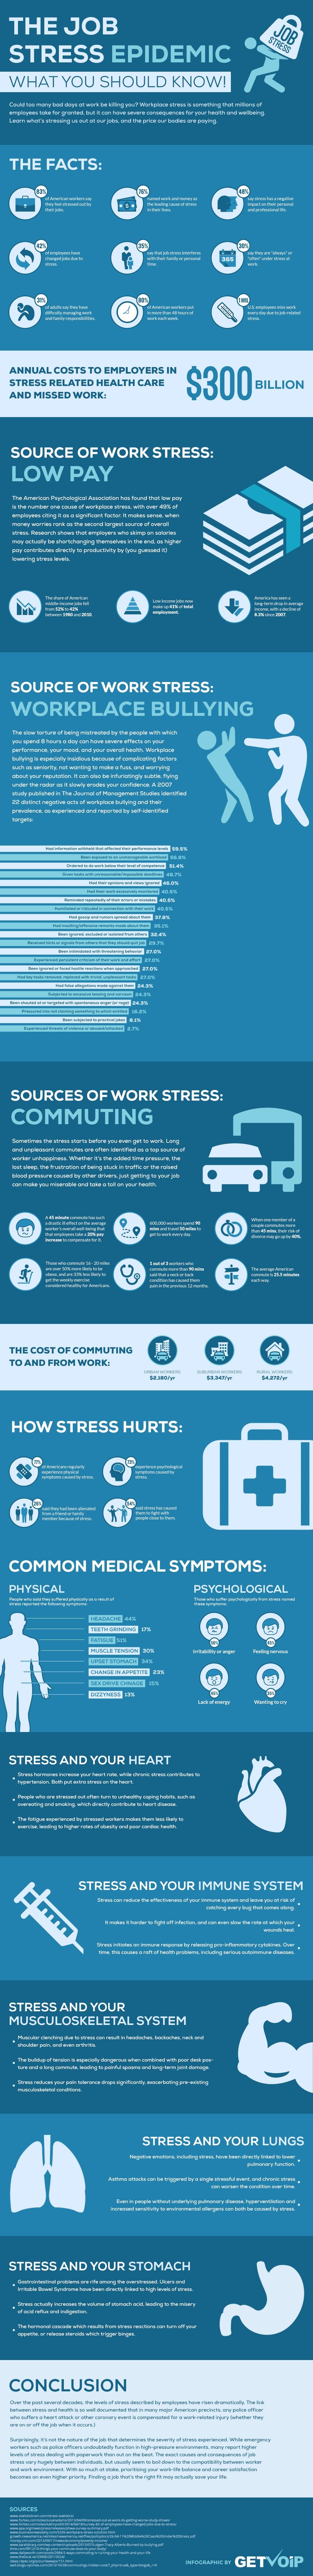 The Job Stress Epidemic Is Making Us Sick, Here 's What You Need To Know! [Infographic]